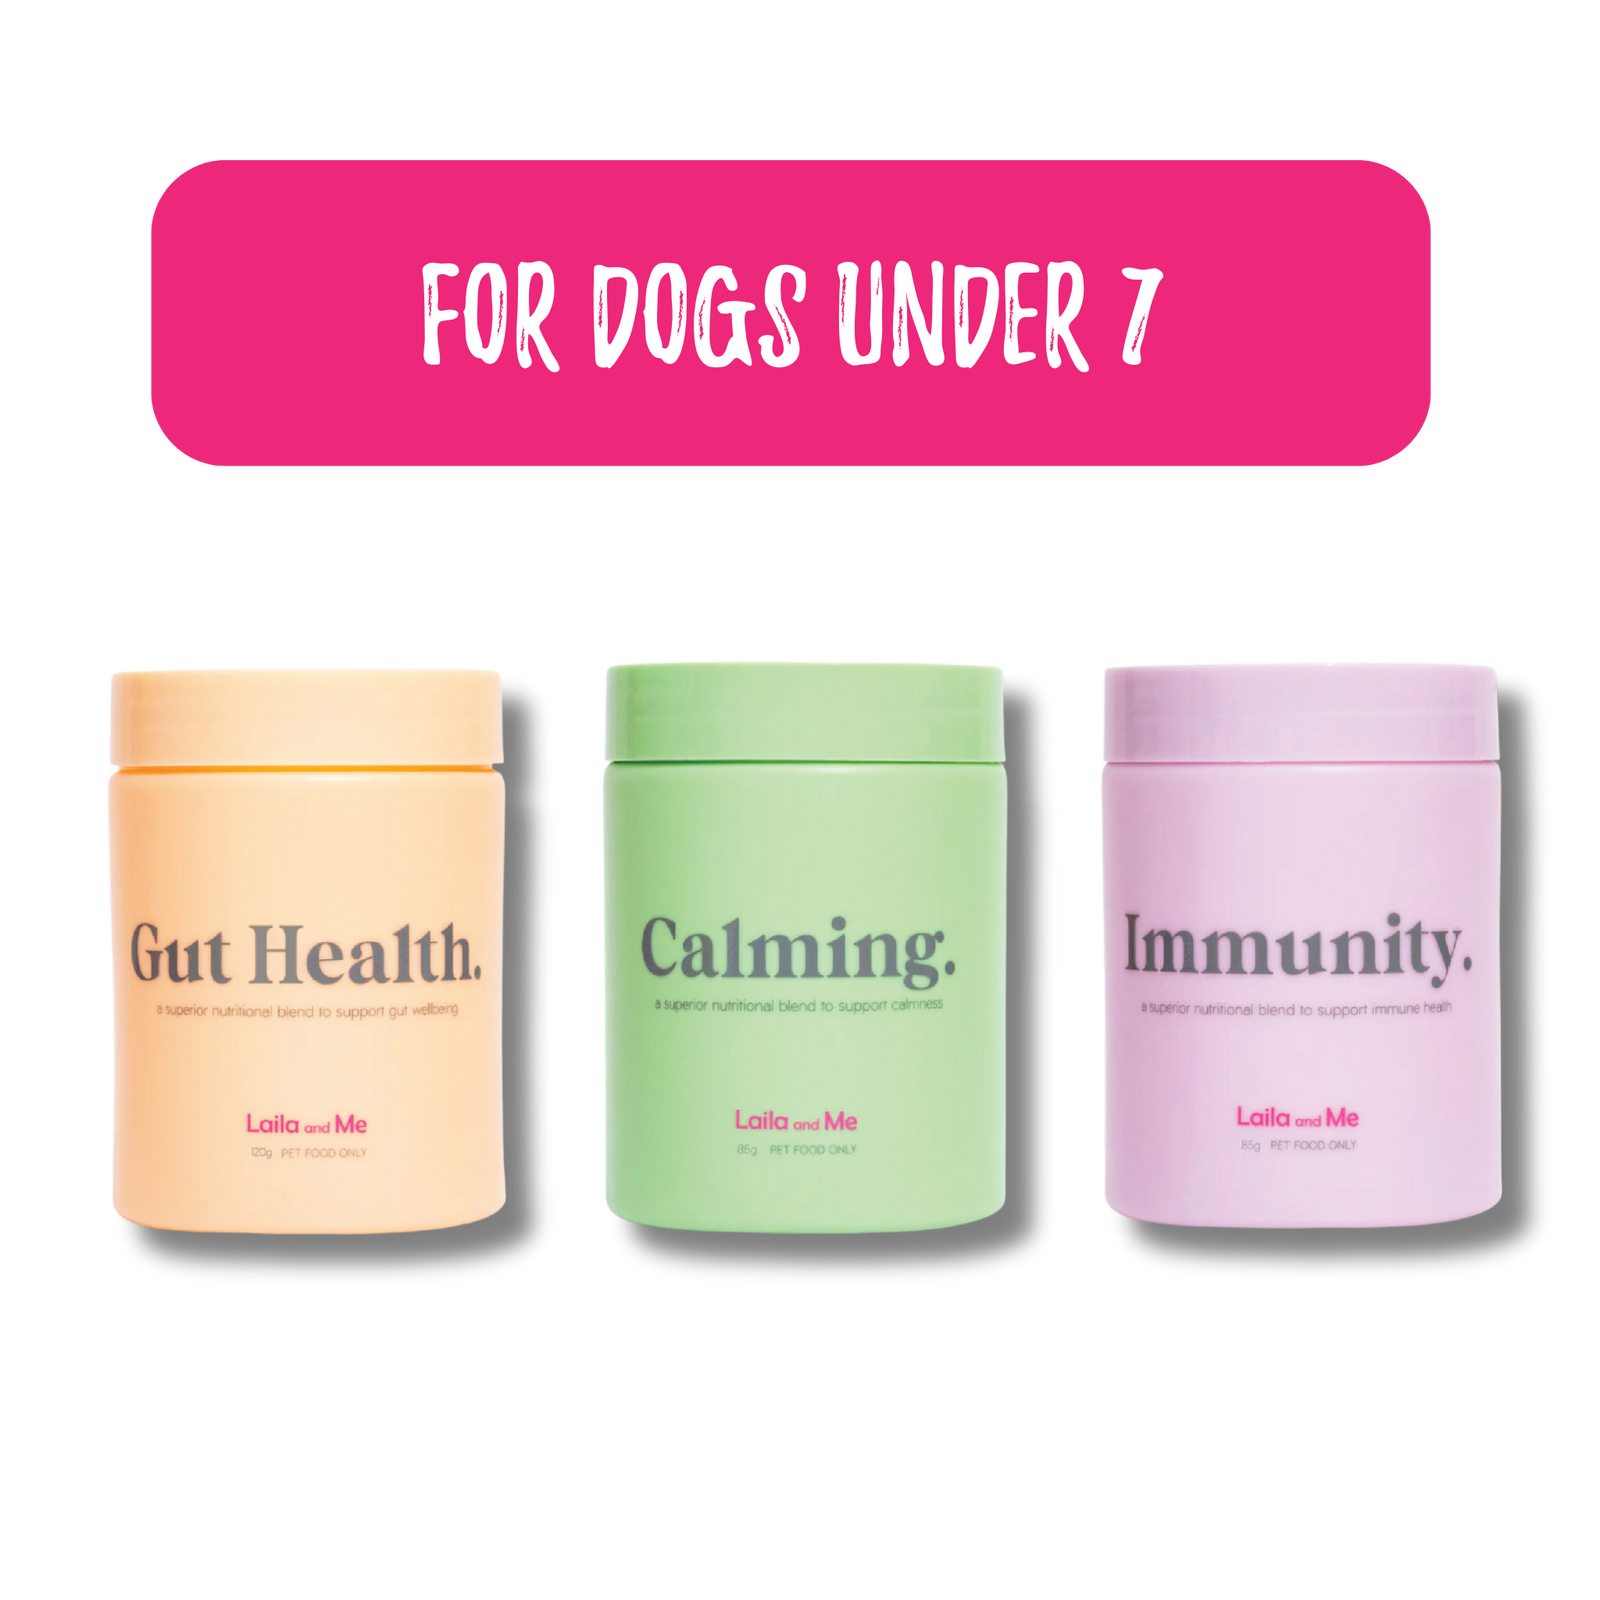 Supplements for dogs under seven - Laila and Me